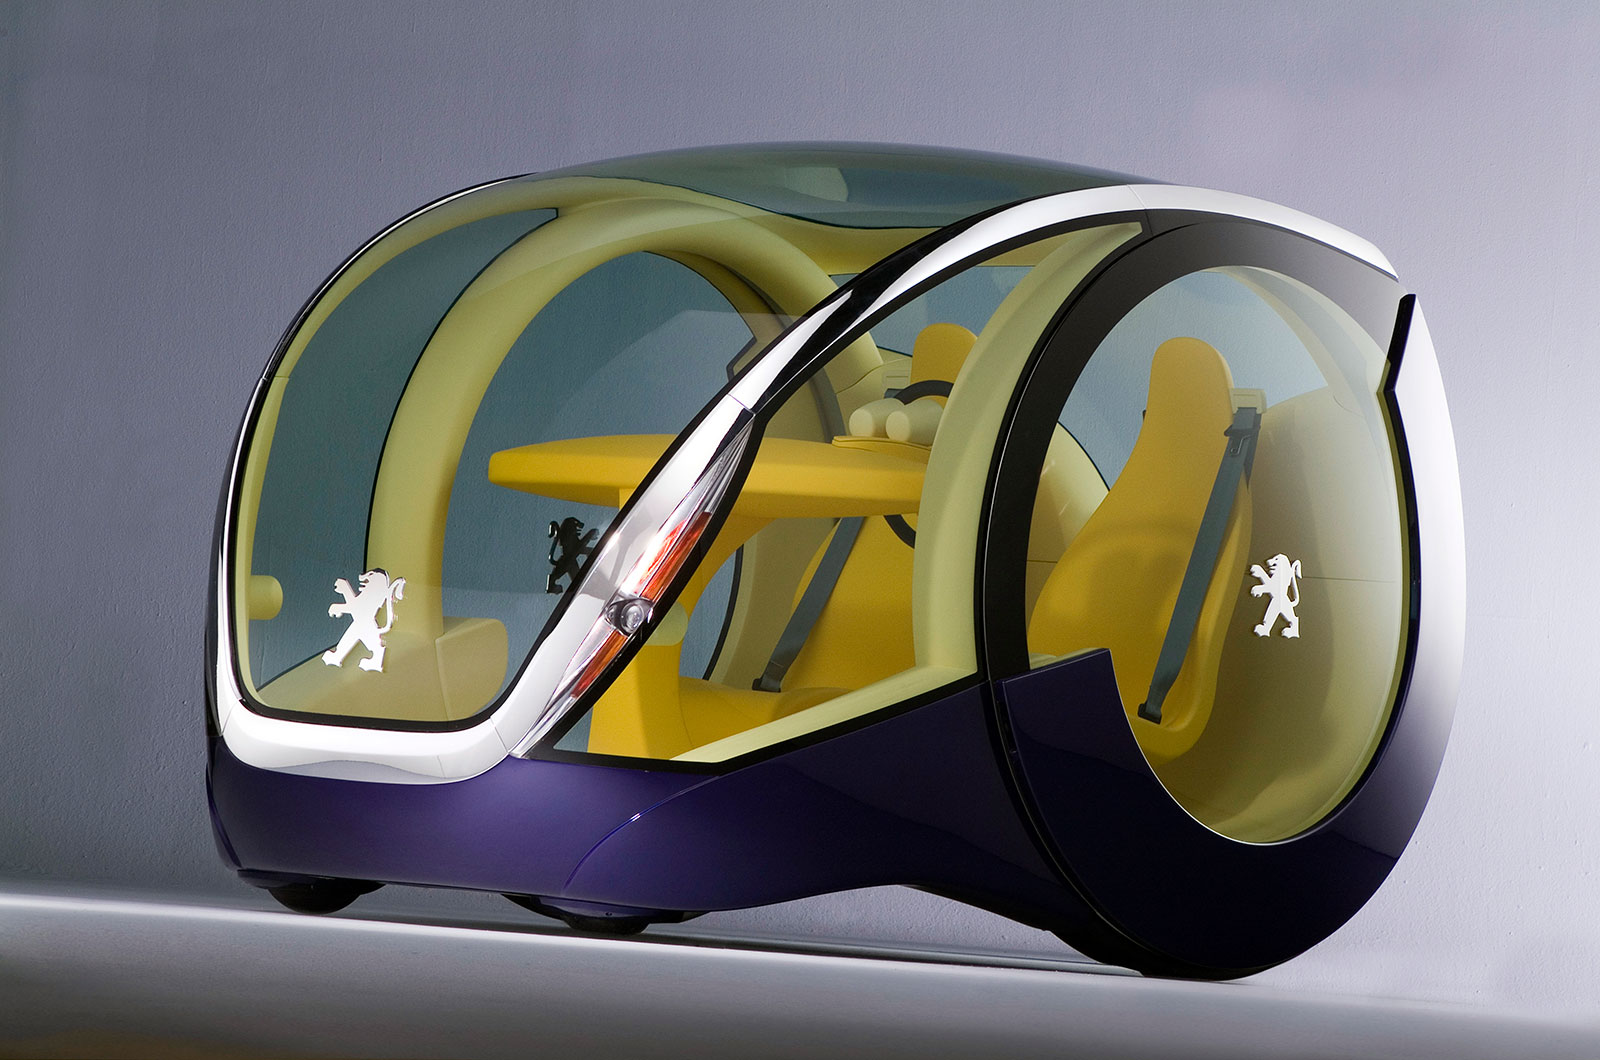 <p>Billed as an agile and environmentally friendly city car by its designer <strong>André Costa</strong>, a full-scale model of the Moovie was built, but for some reason Peugeot never committed to making the car available in its showrooms.</p>